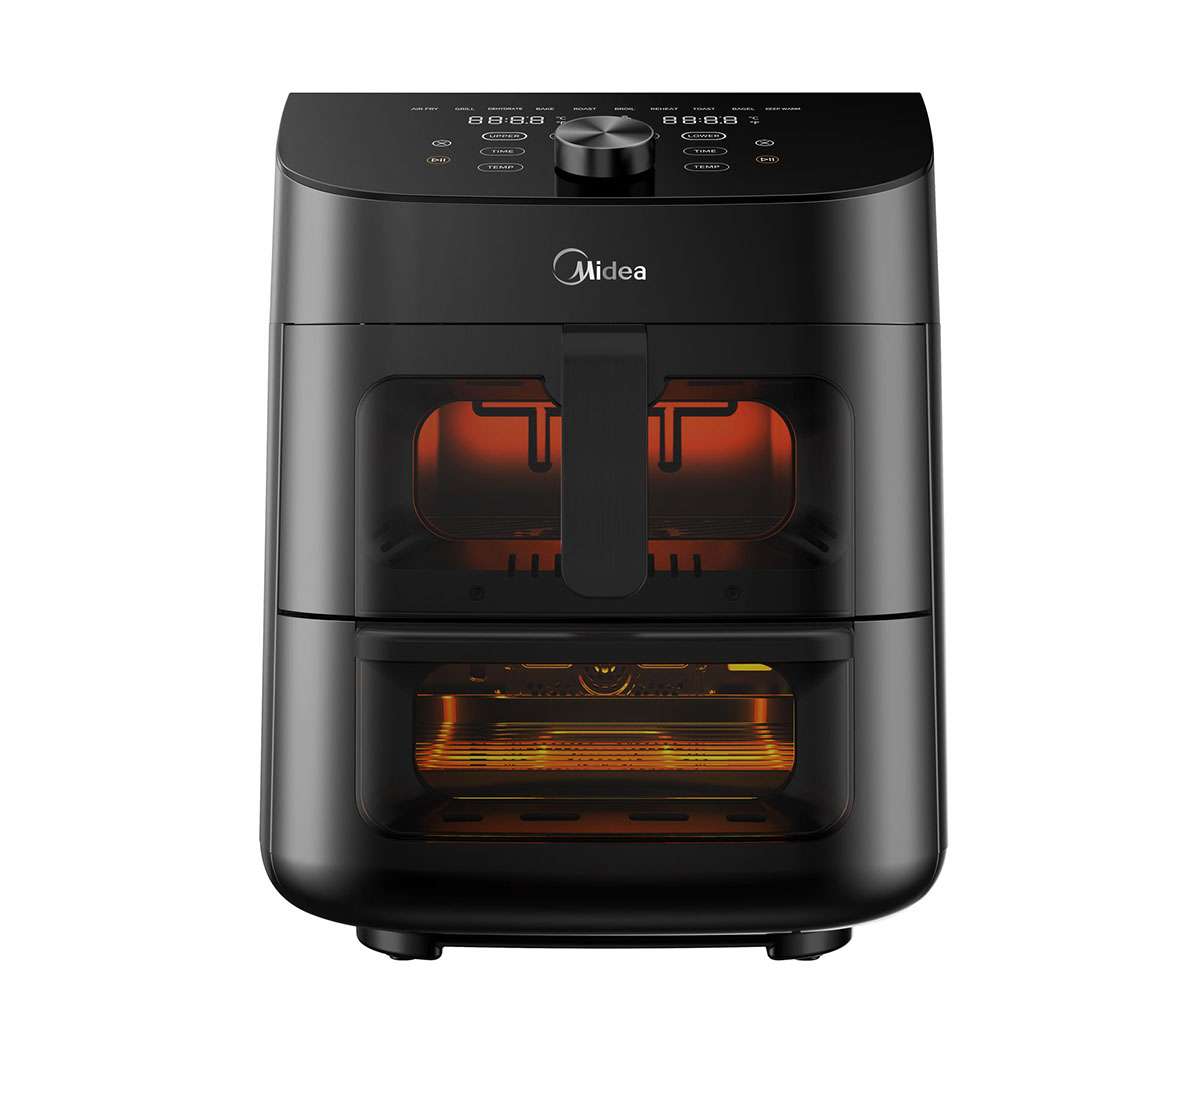 Two-in-One Countertop Cooking Appliances : air fryer appliance